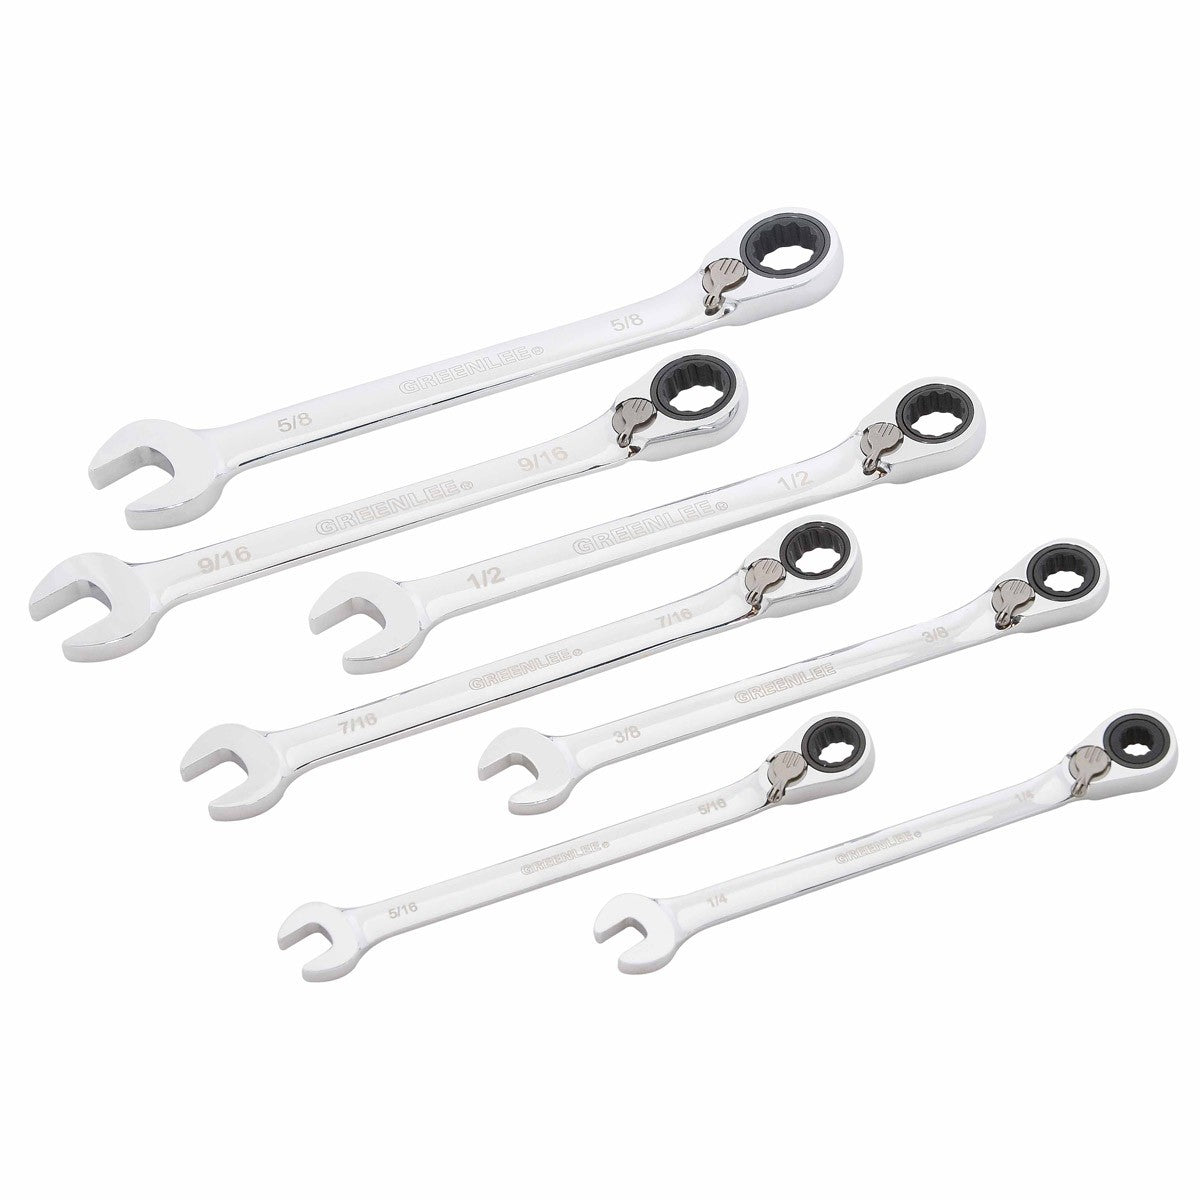 Greenlee 0354-01 7-Piece Combination Ratcheting Wrench Set